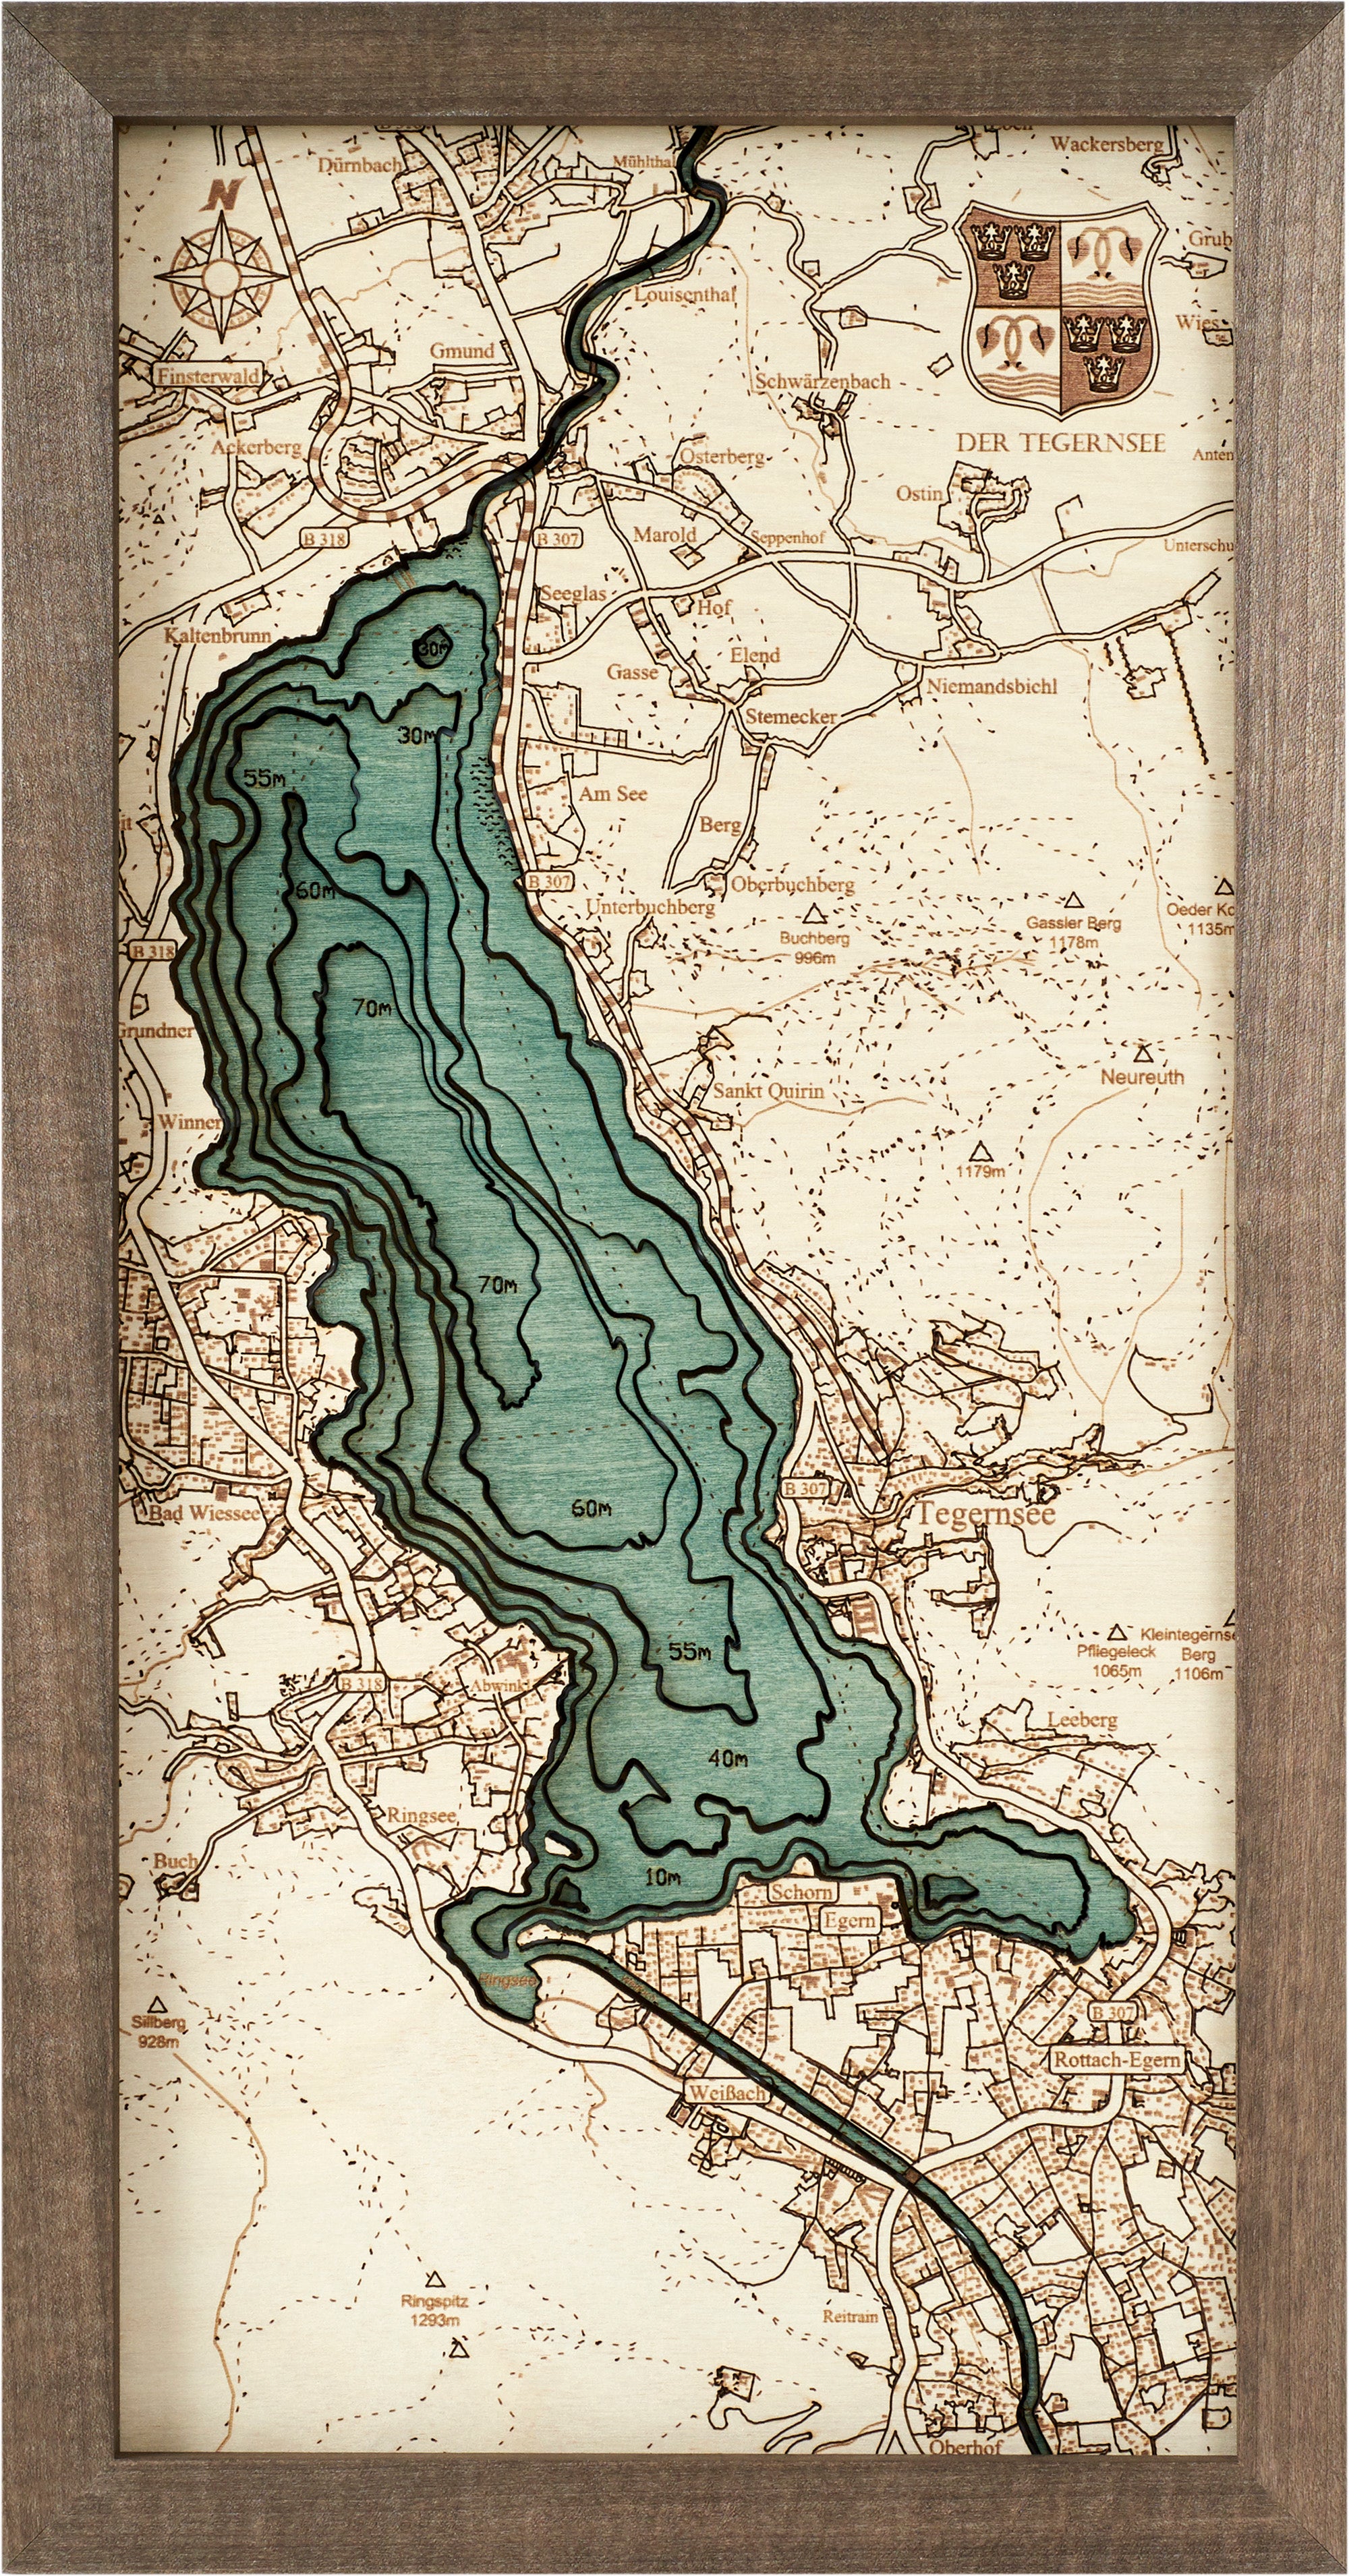 LAKE TEGERNSEE 3D WOODEN WALL MAP - VERSION S